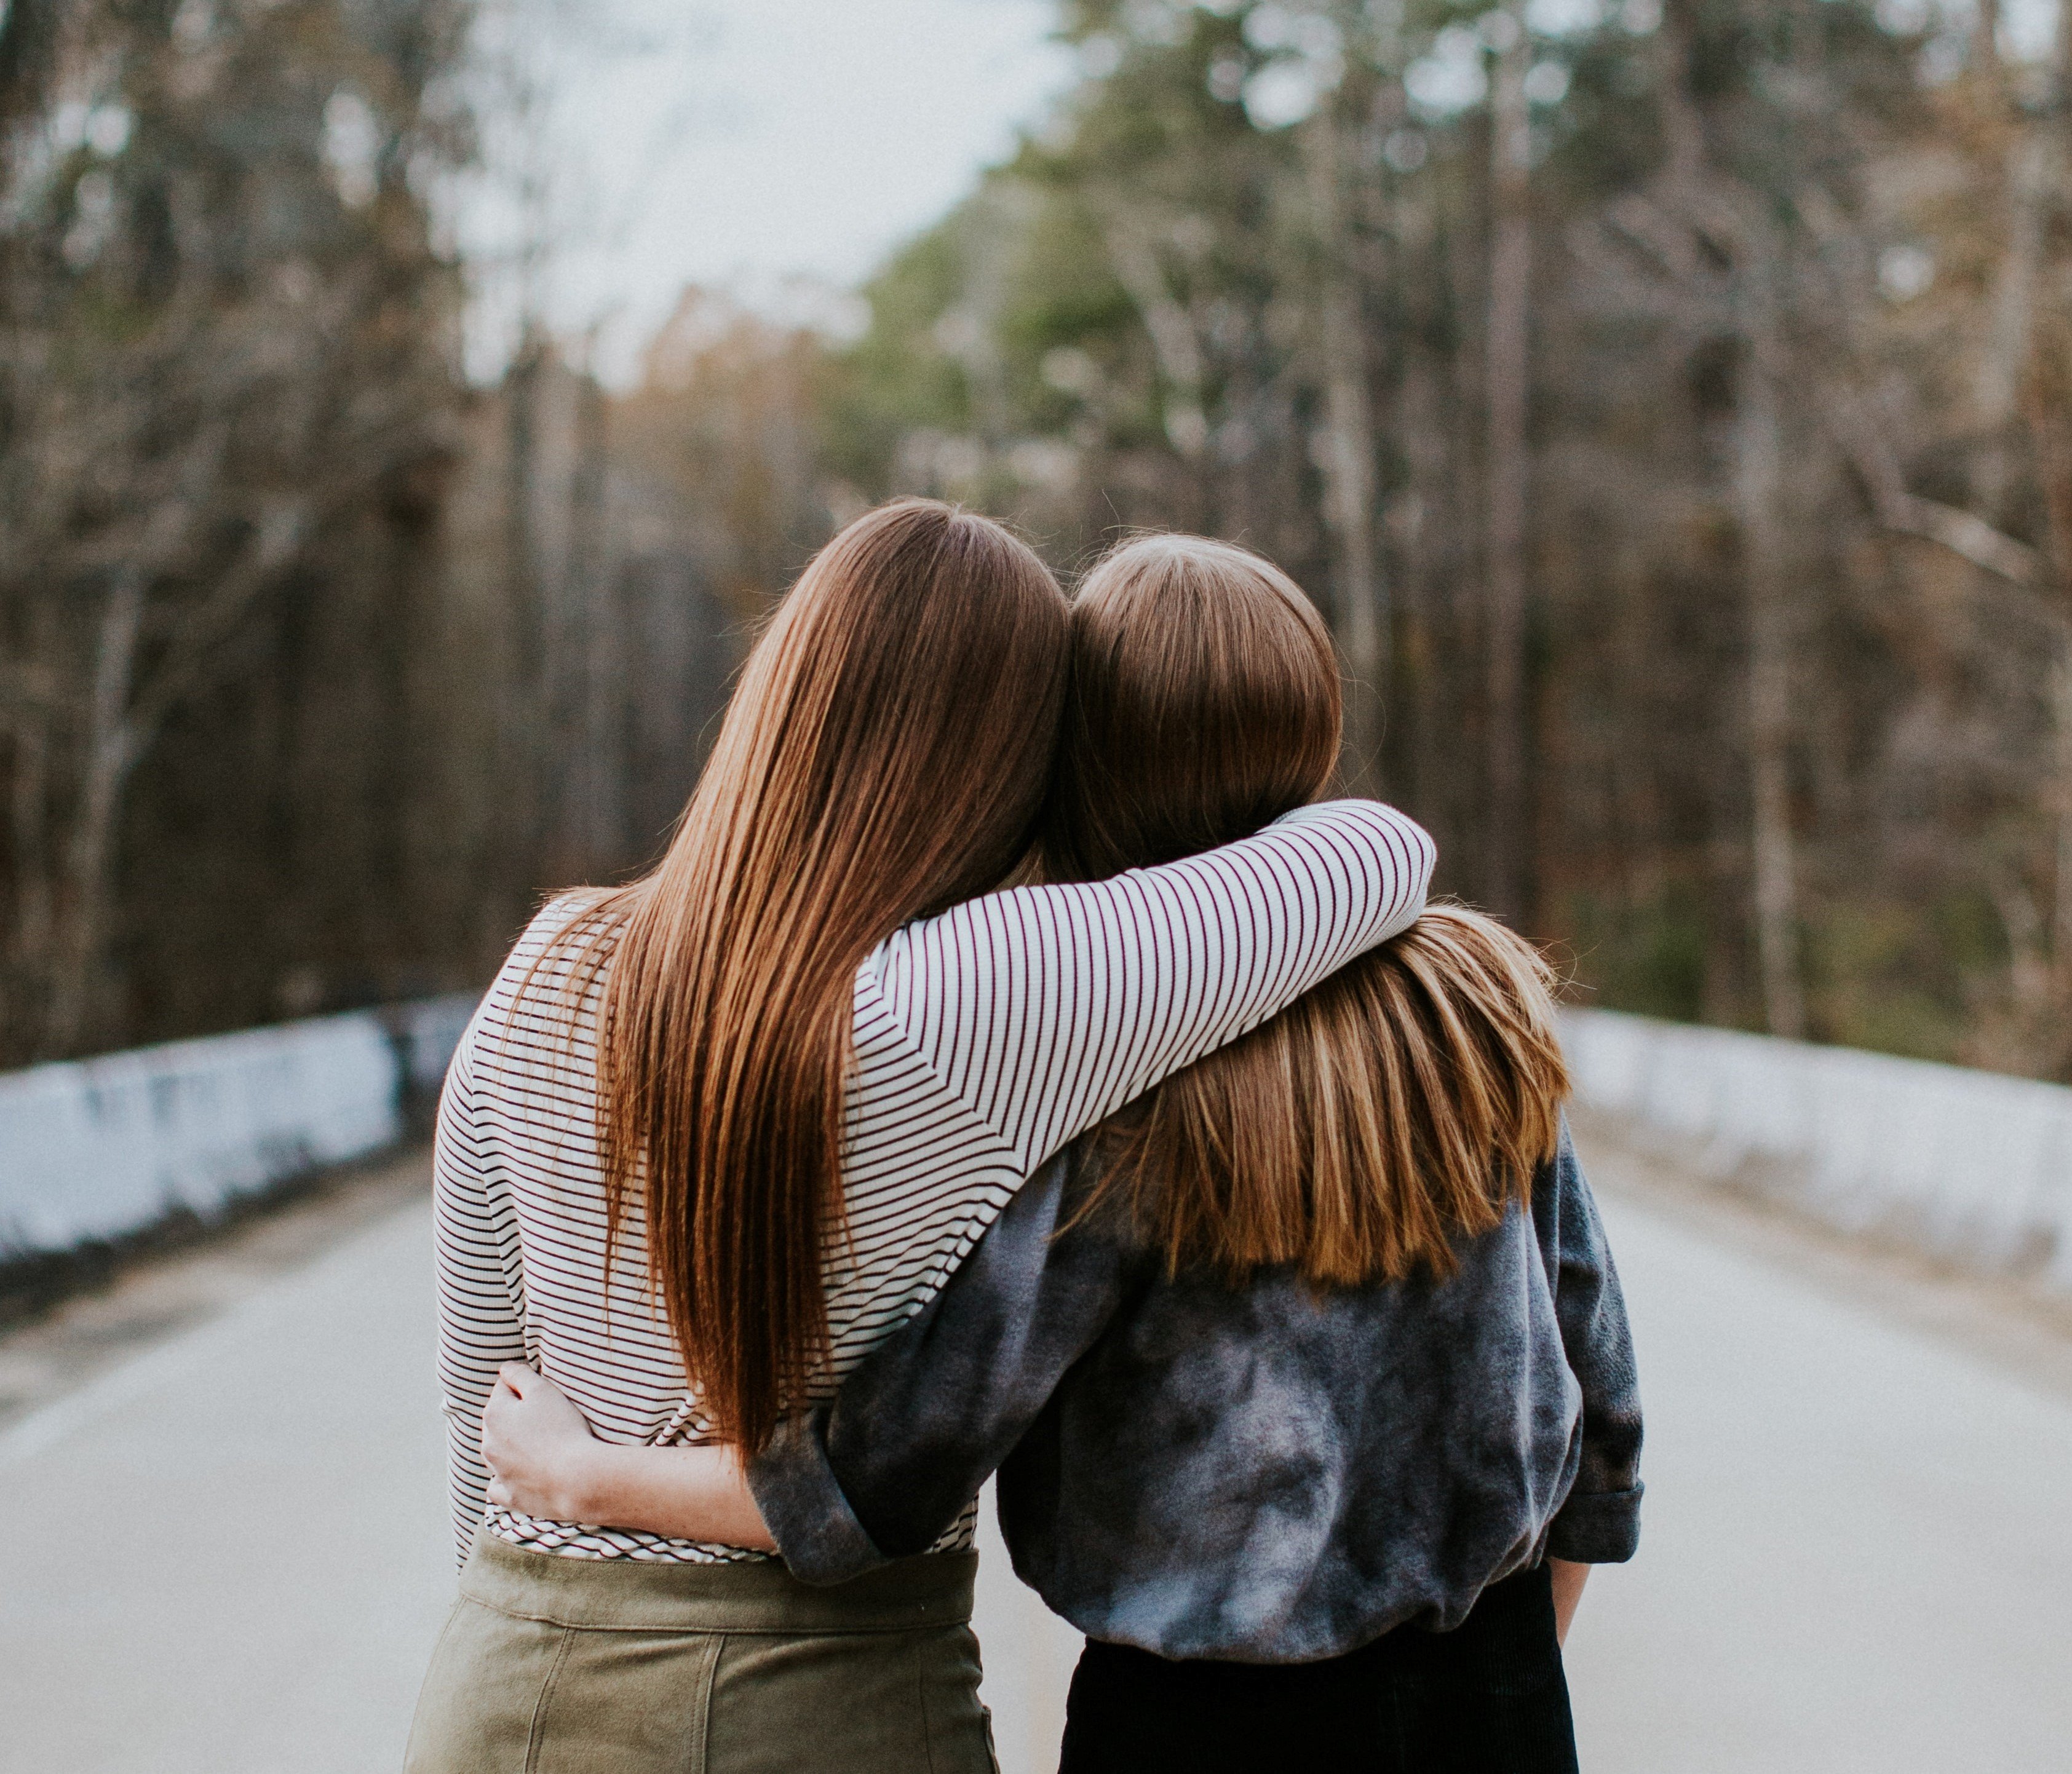 After years of no contact, Karen united with her long-lost sister, Violet. | Source: Unsplash